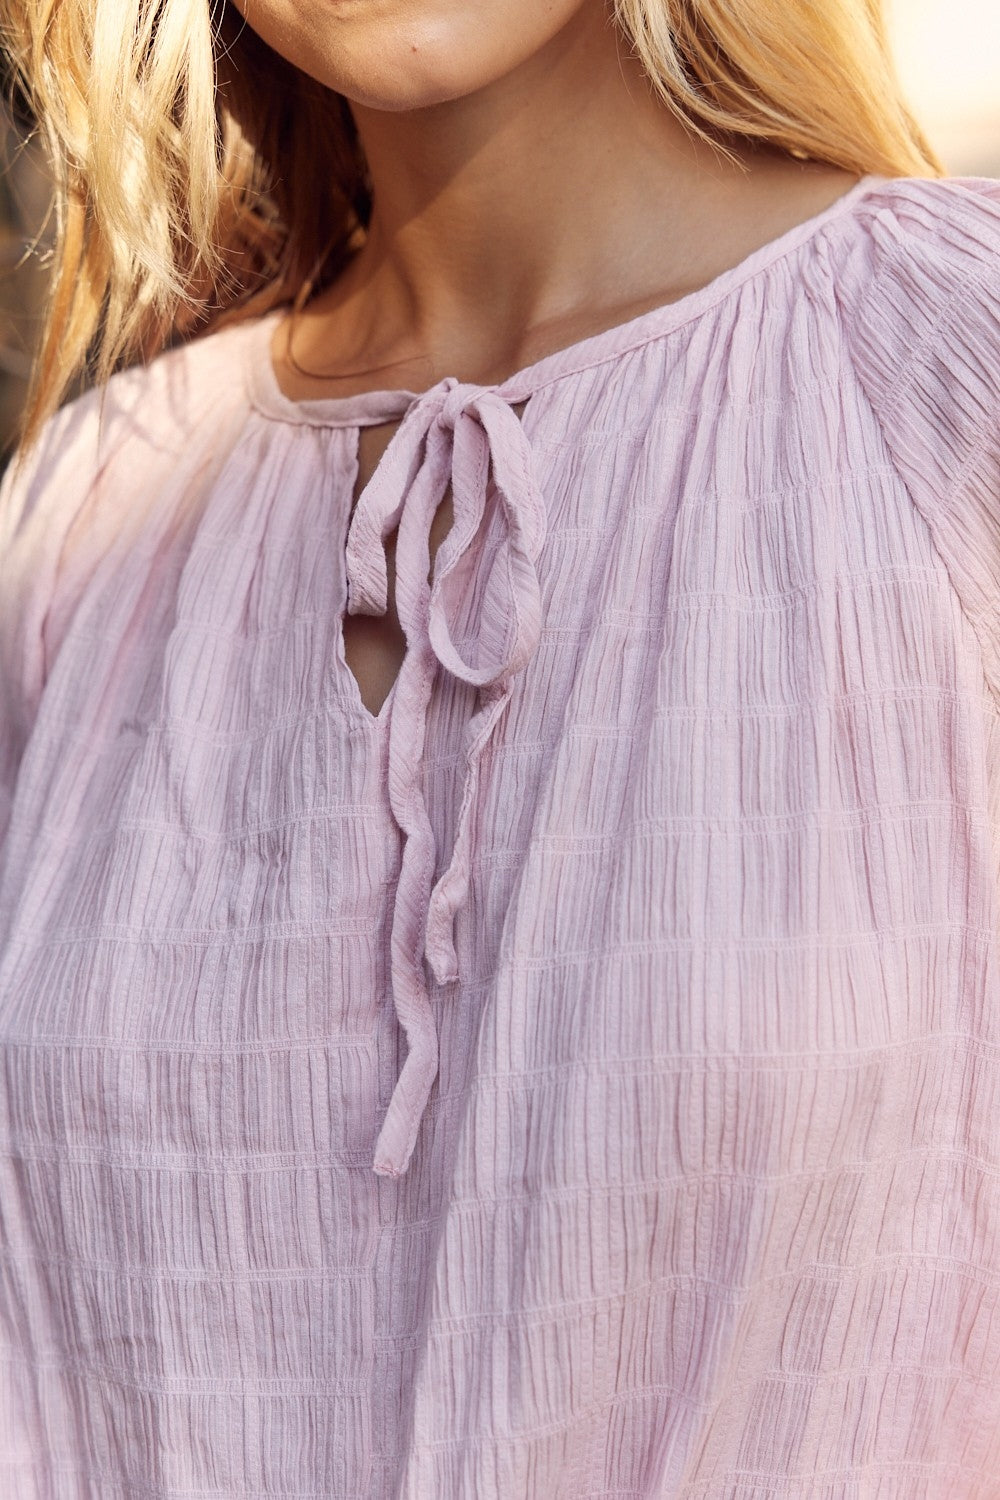 In February Textured Tie Neck Blouse